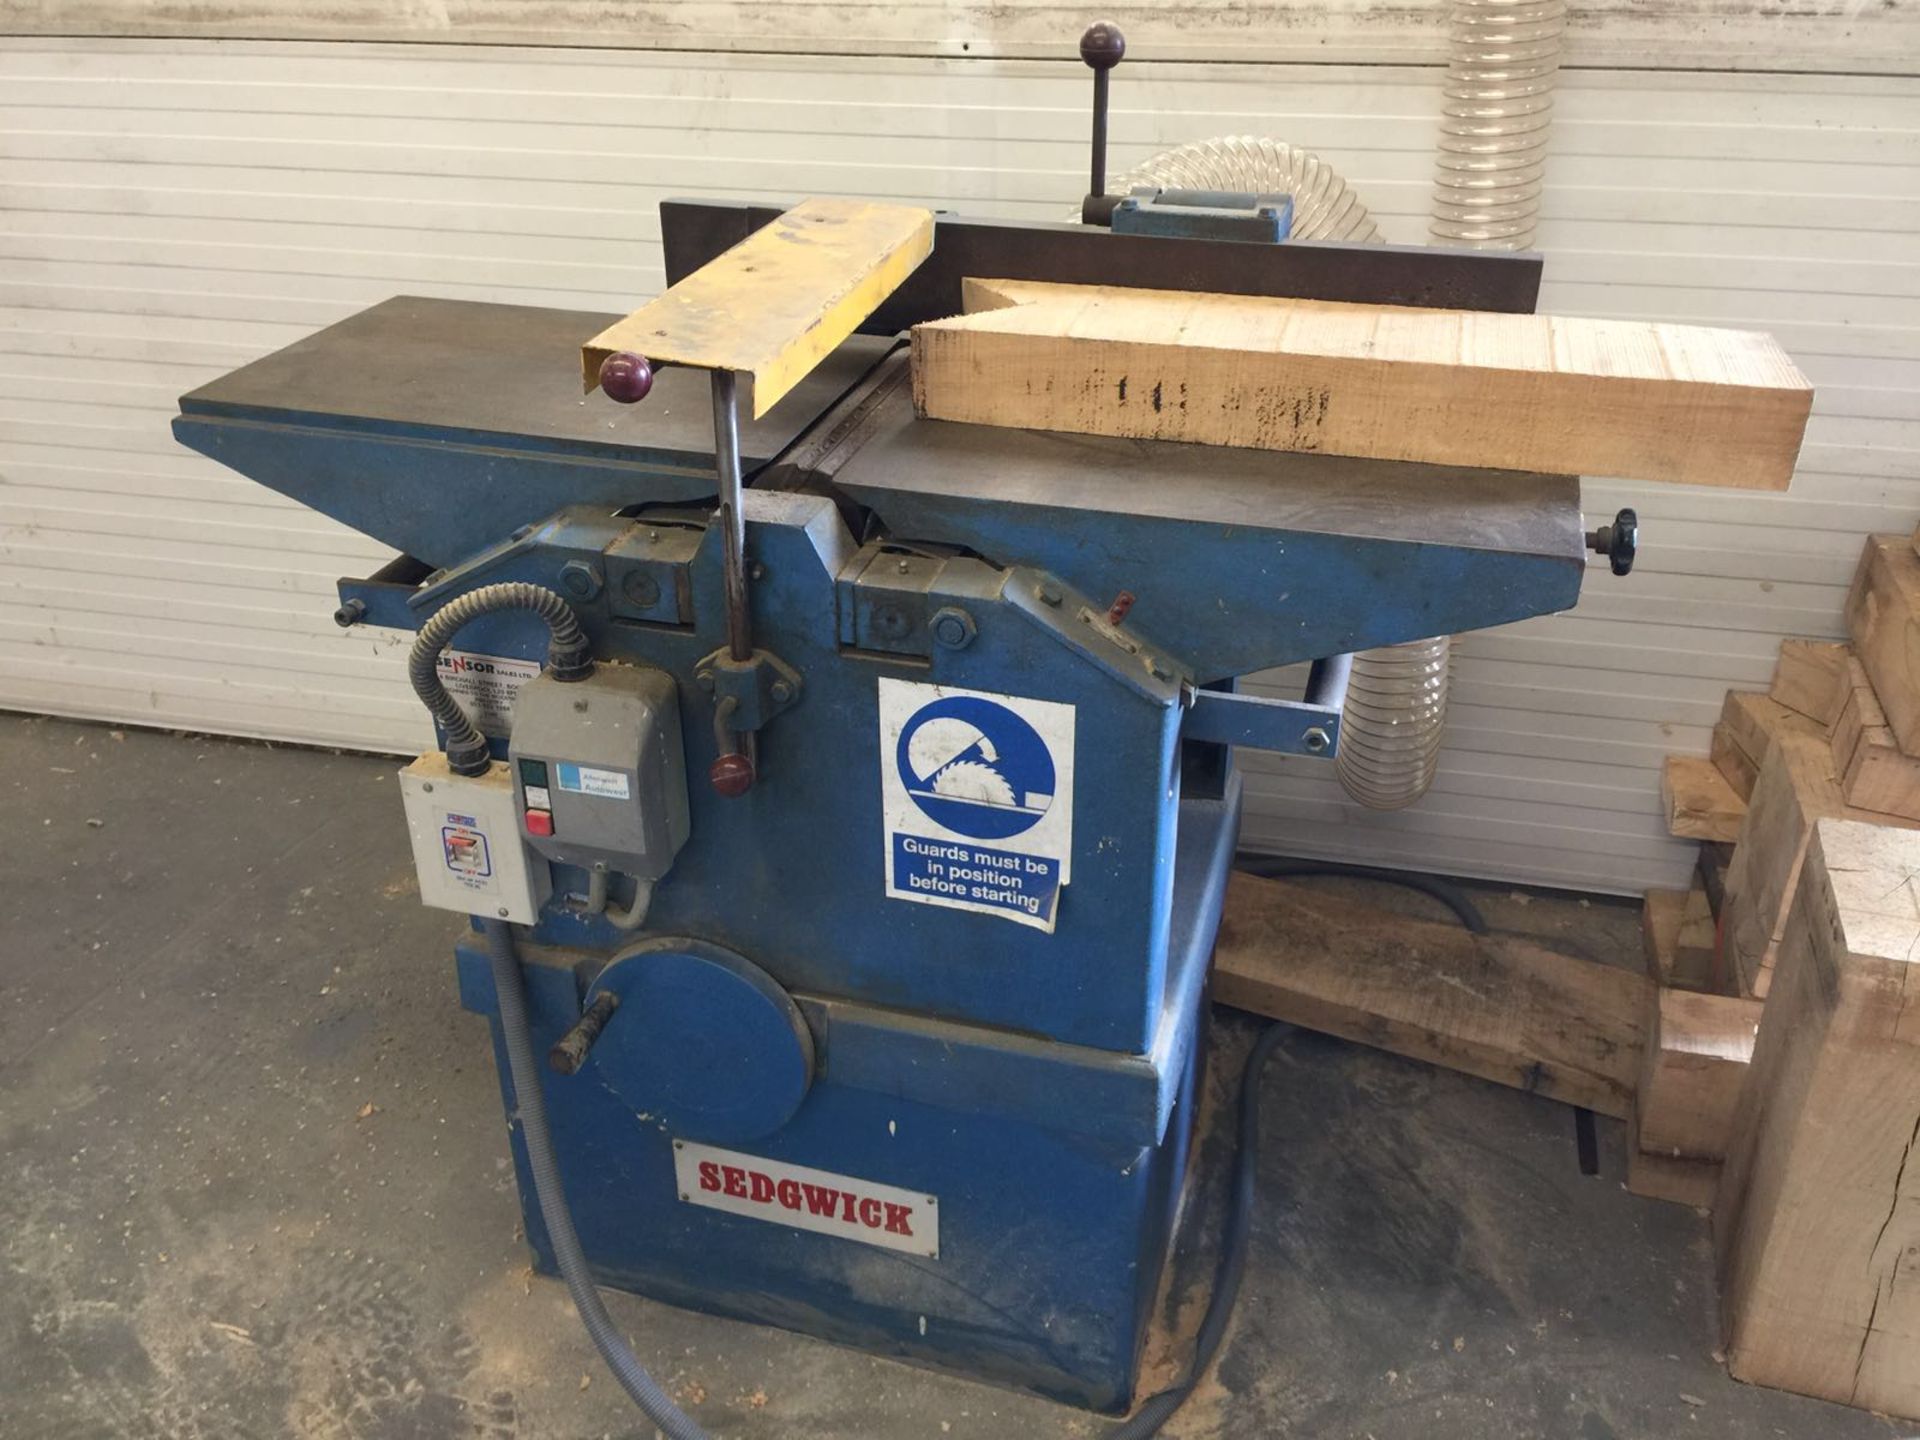 2005 SEDGWICK BENCH PLANER / THICKNESSER - IN WORKING ORDER